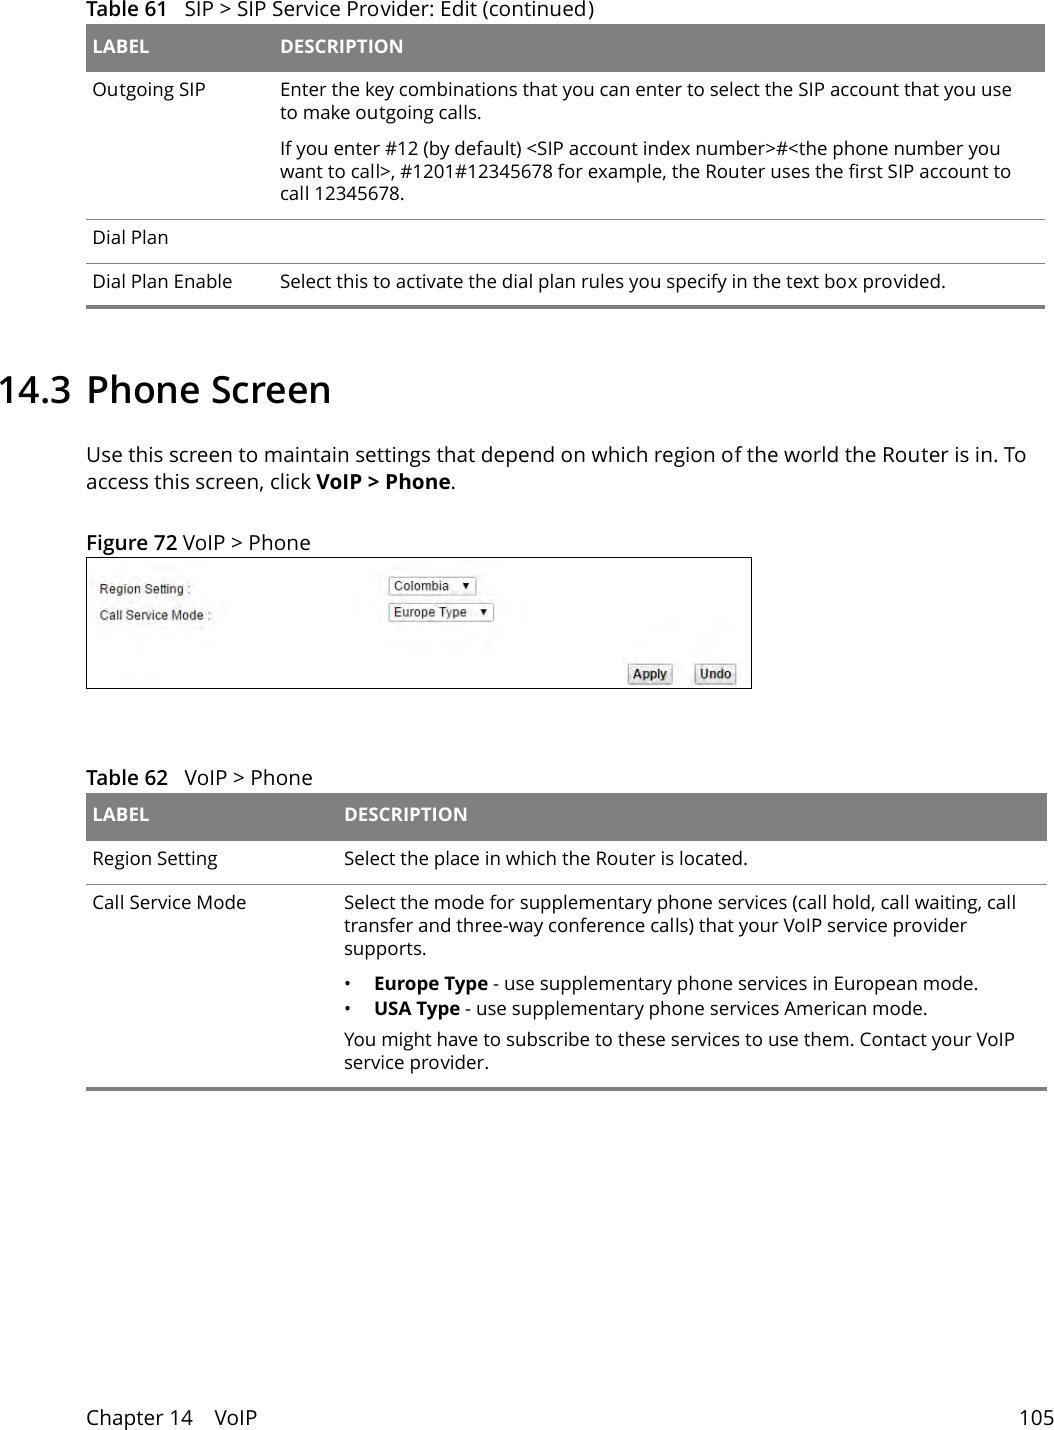 Chapter 14    VoIP 10514.3 Phone ScreenUse this screen to maintain settings that depend on which region of the world the Router is in. To access this screen, click VoIP &gt; Phone.Figure 72 VoIP &gt; PhoneTable 62   VoIP &gt; PhoneLABEL DESCRIPTIONRegion Setting Select the place in which the Router is located.Call Service Mode Select the mode for supplementary phone services (call hold, call waiting, call transfer and three-way conference calls) that your VoIP service provider supports.•Europe Type - use supplementary phone services in European mode.•USA Type - use supplementary phone services American mode.You might have to subscribe to these services to use them. Contact your VoIP service provider.Outgoing SIP Enter the key combinations that you can enter to select the SIP account that you use to make outgoing calls. If you enter #12 (by default) &lt;SIP account index number&gt;#&lt;the phone number you want to call&gt;, #1201#12345678 for example, the Router uses the first SIP account to call 12345678.Dial PlanDial Plan Enable Select this to activate the dial plan rules you specify in the text box provided. Table 61   SIP &gt; SIP Service Provider: Edit (continued)LABEL DESCRIPTION